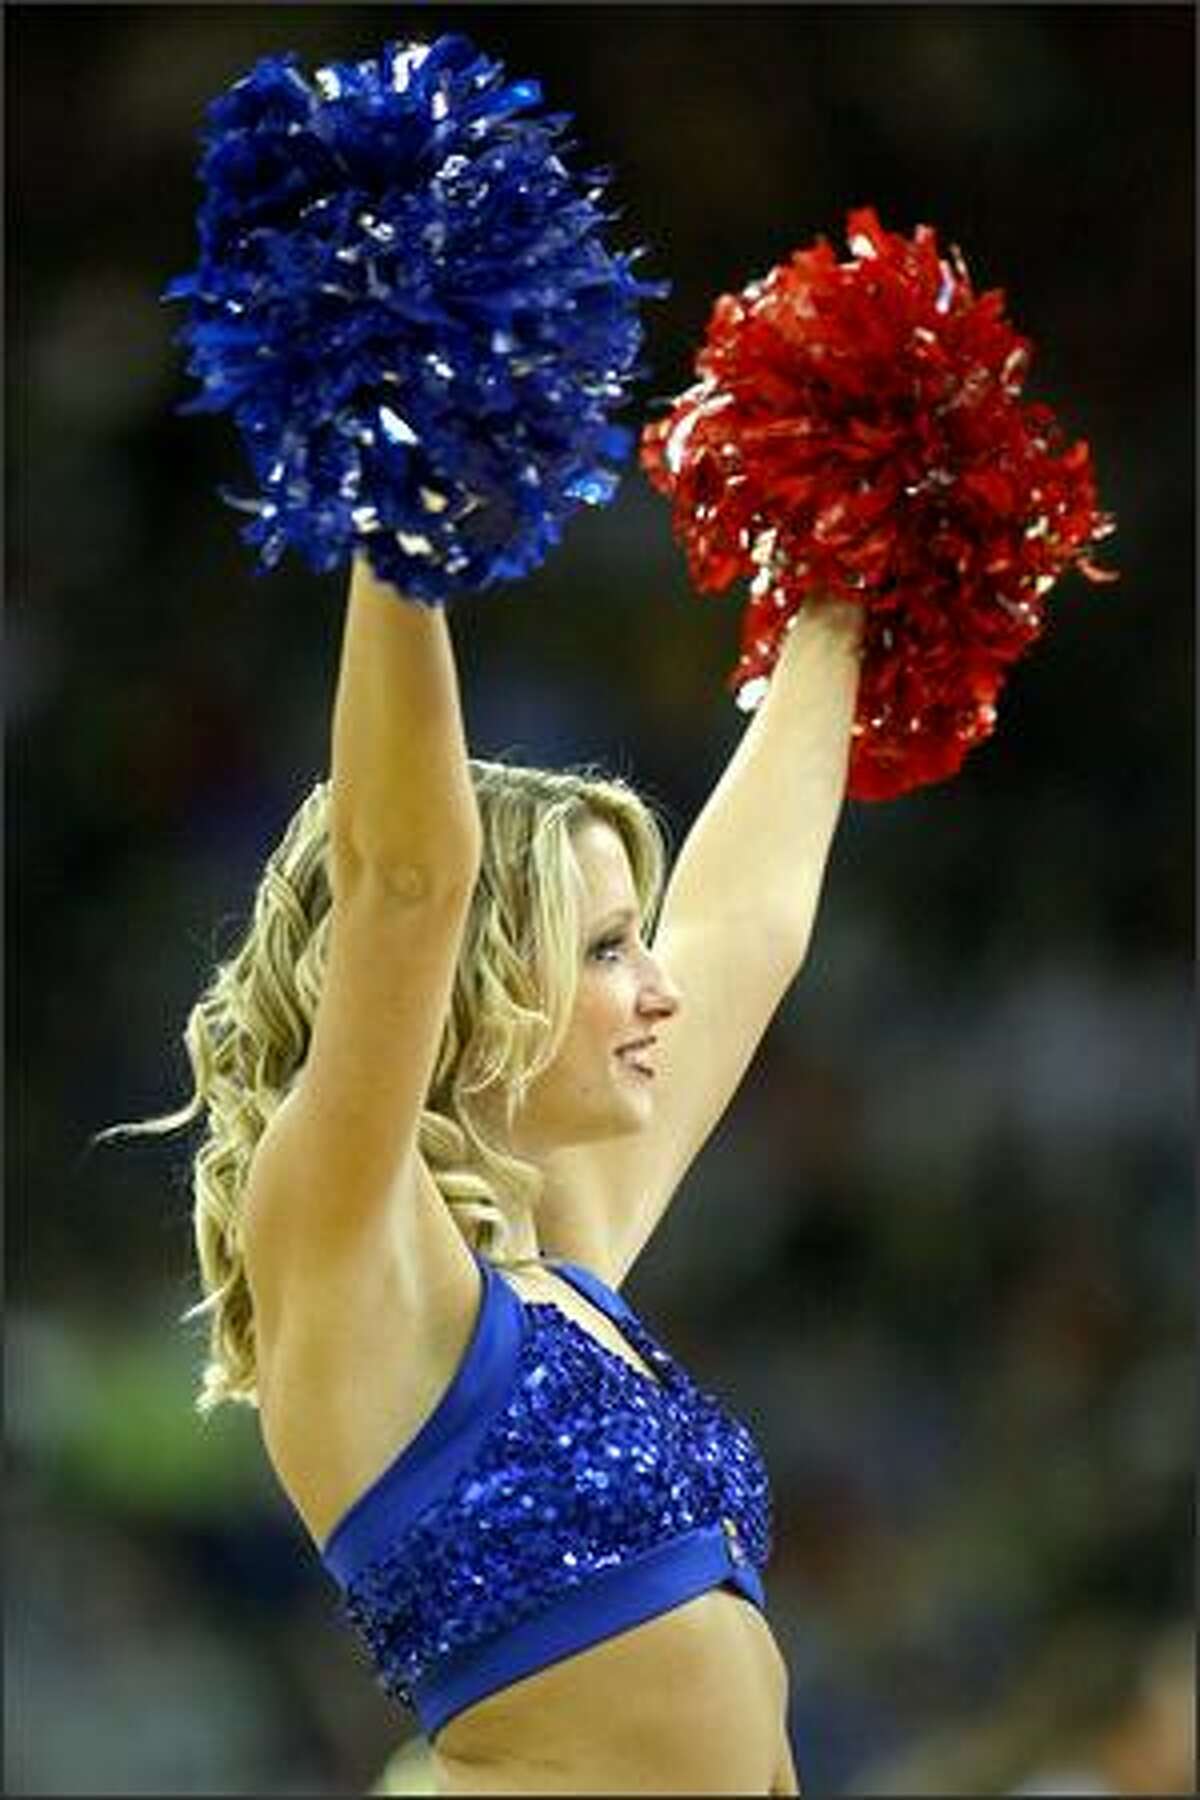 A cheerleader for the Kansas Jayhawks performs during the Midwest Region second round game against the UNLV Runnin' Rebels at the Qwest Center in Omaha, Neb.